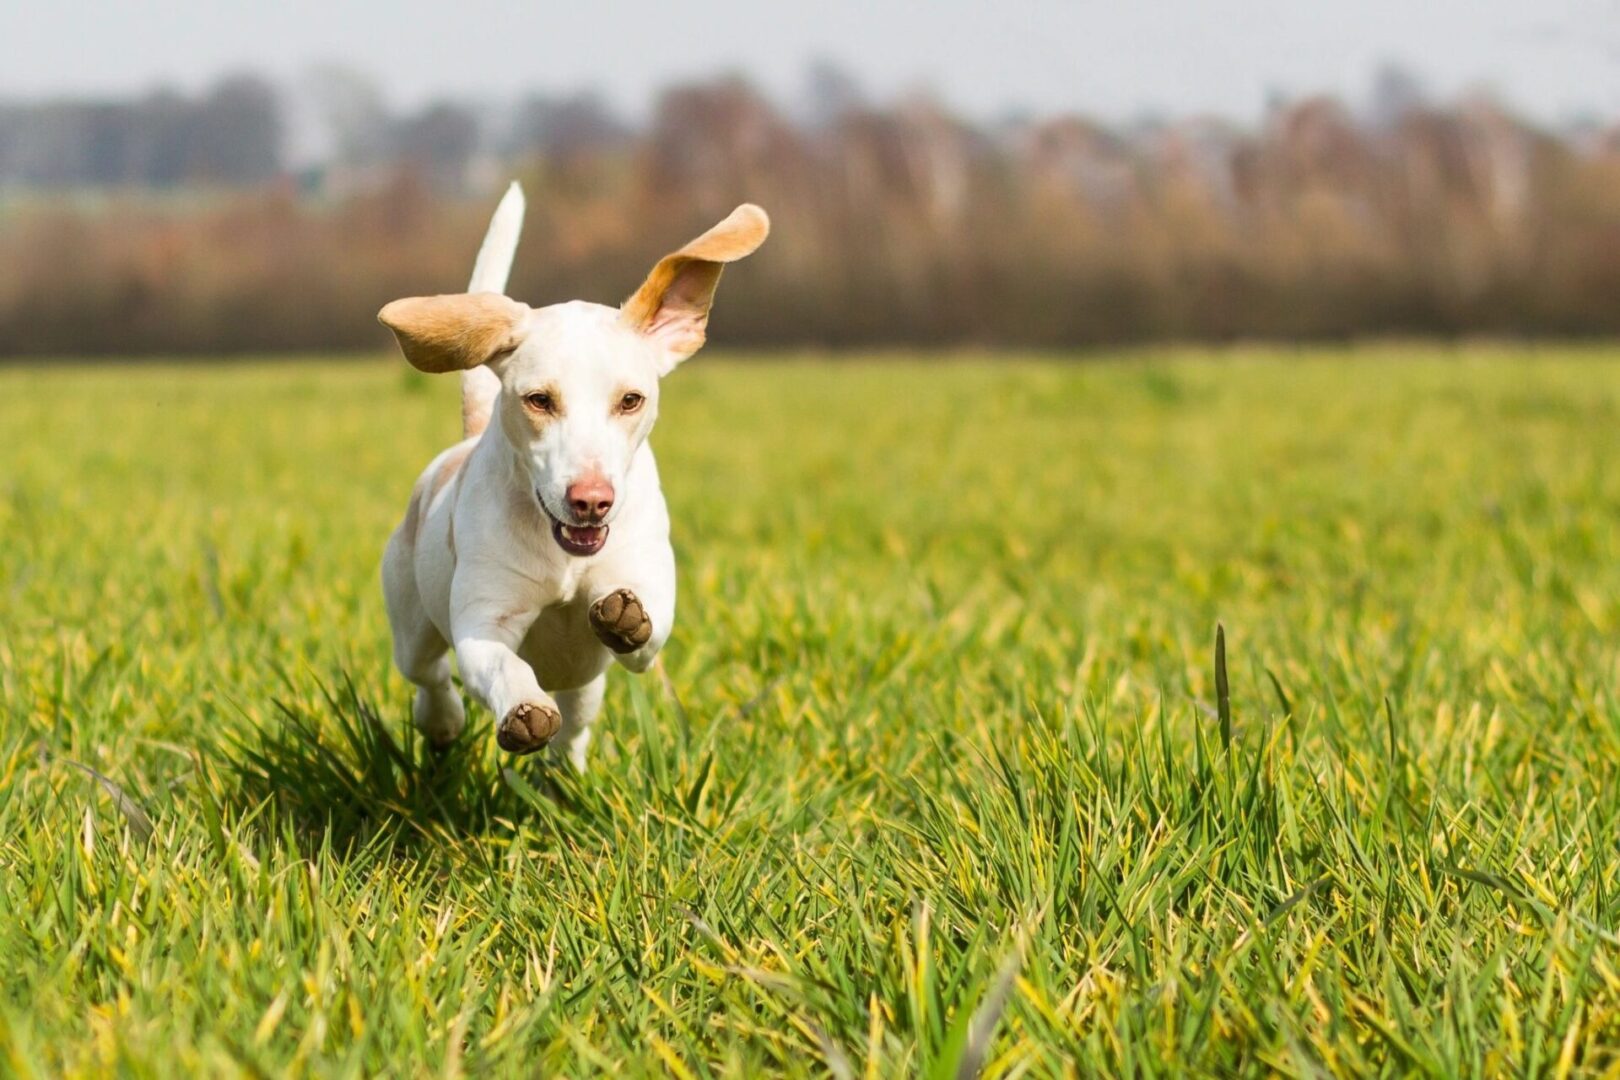 A dog running on the grass field with trees in the back